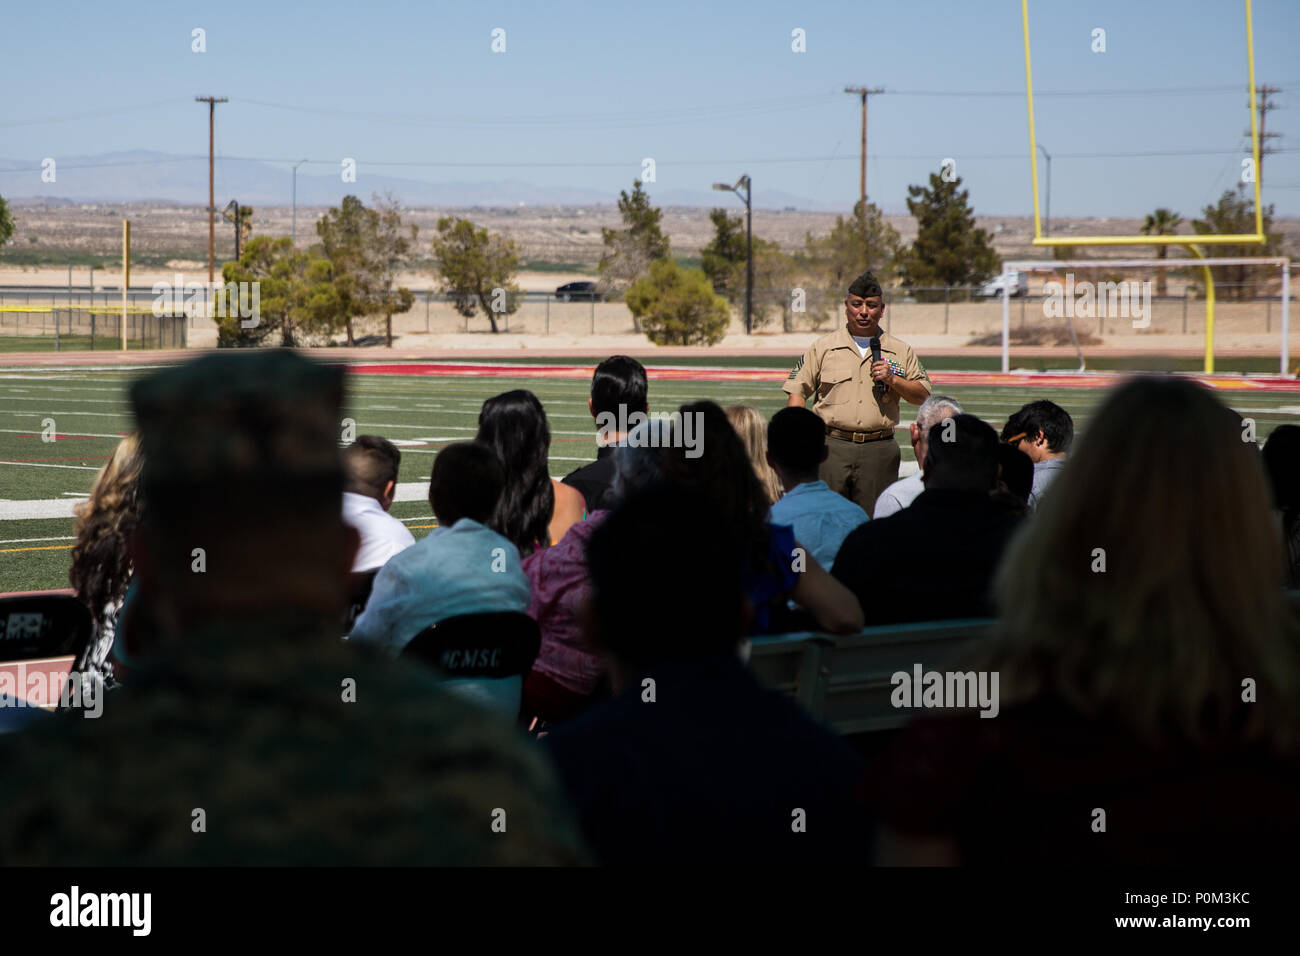 Master Gunnery Sgt. Joseph Lopez, supply chain administration and operations specialist, Headquarters Battalion, speaks during his retirement ceremony at Felix Field aboard the Marine Corps Air Ground Combat Center, Twentynine Palms, Calif., June 1, 2018. Lopez is retiring after 30 years of faithful service to country and Corps. (U.S. Marine Corps photo by Lance Cpl. Isaac Cantrell) Stock Photo